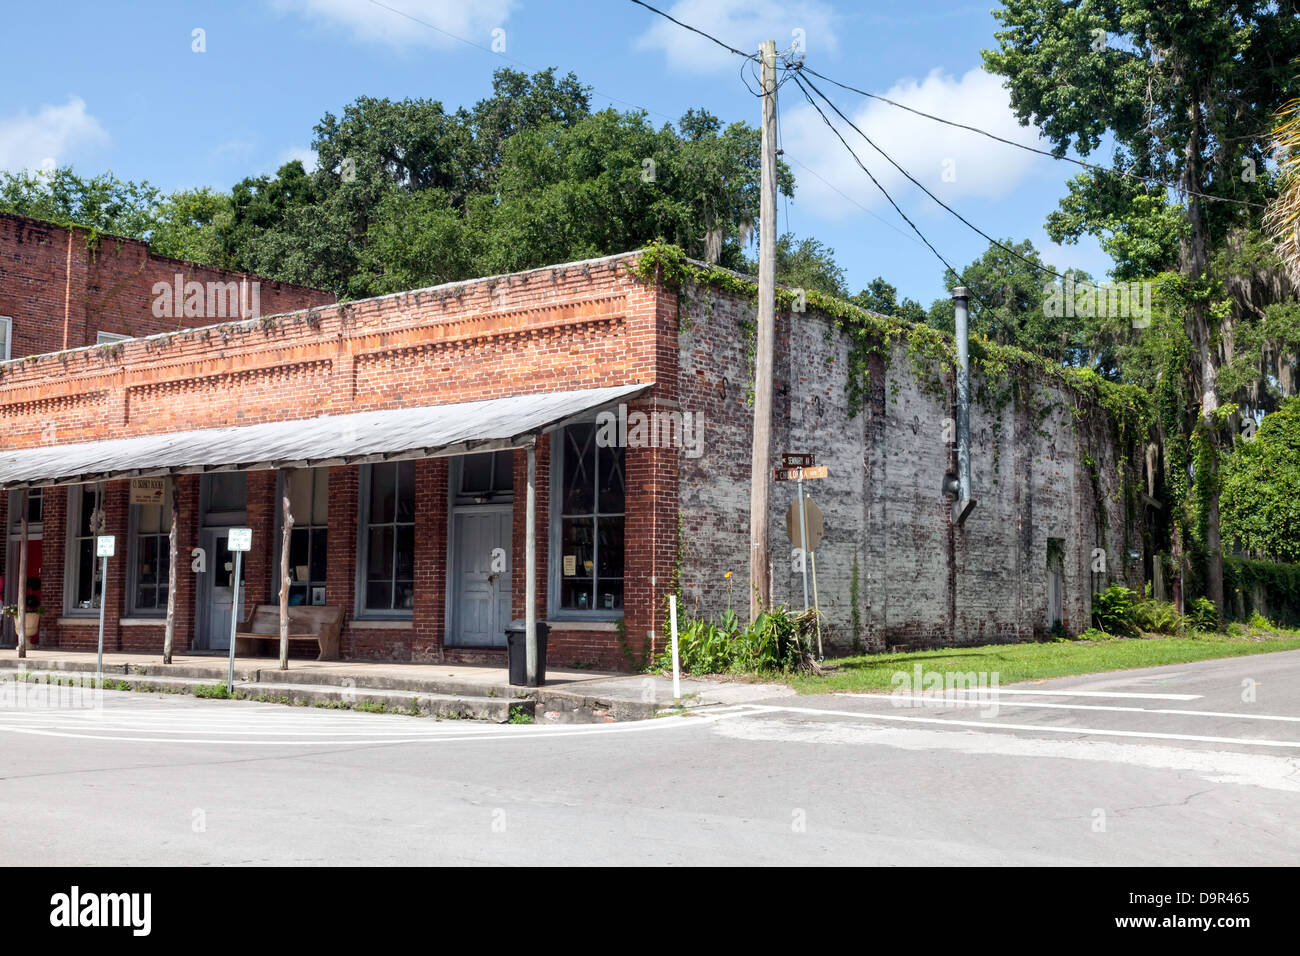 Old single-story brick commercial building with porch covering the sidewalk located in historic district of Micanopy, Florida. Stock Photo